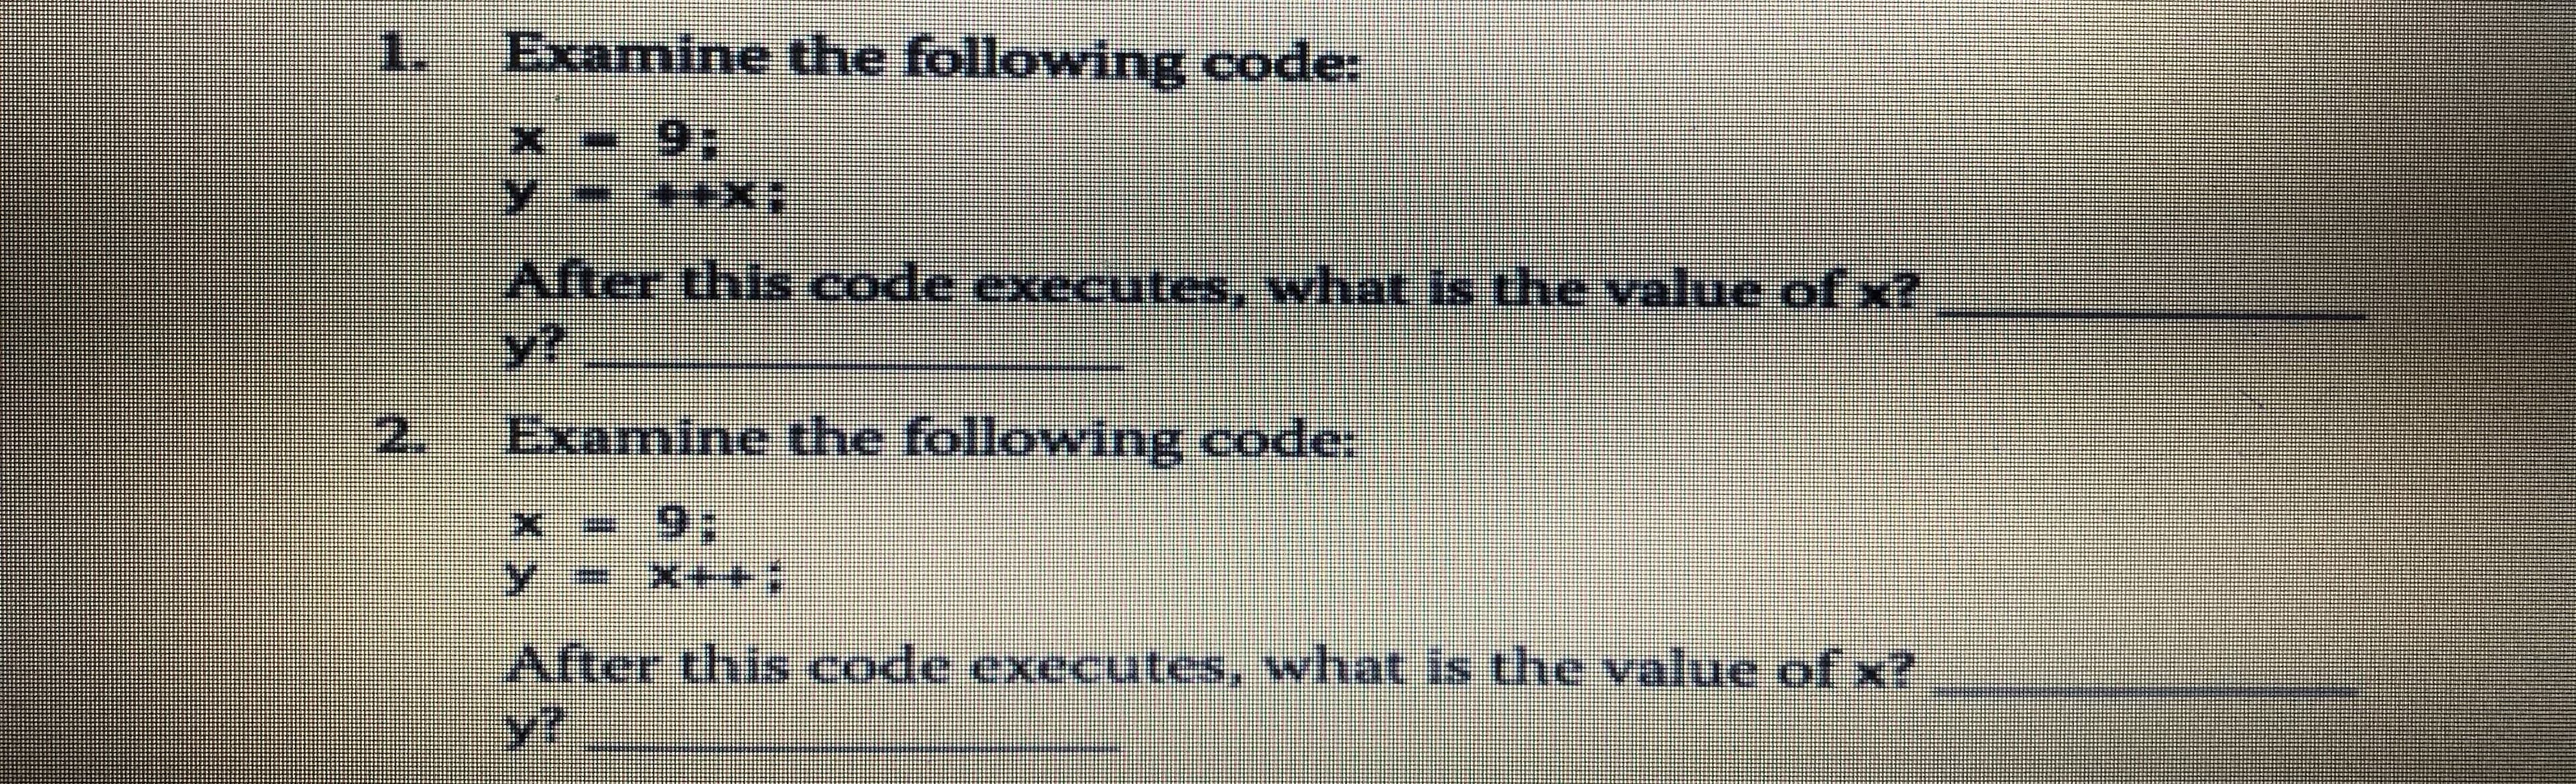 1.
Examine the following code:
After this code executes, what is the value of x?
y?
2.
Examine the following code:
After this code executes, what is the value ofx?
